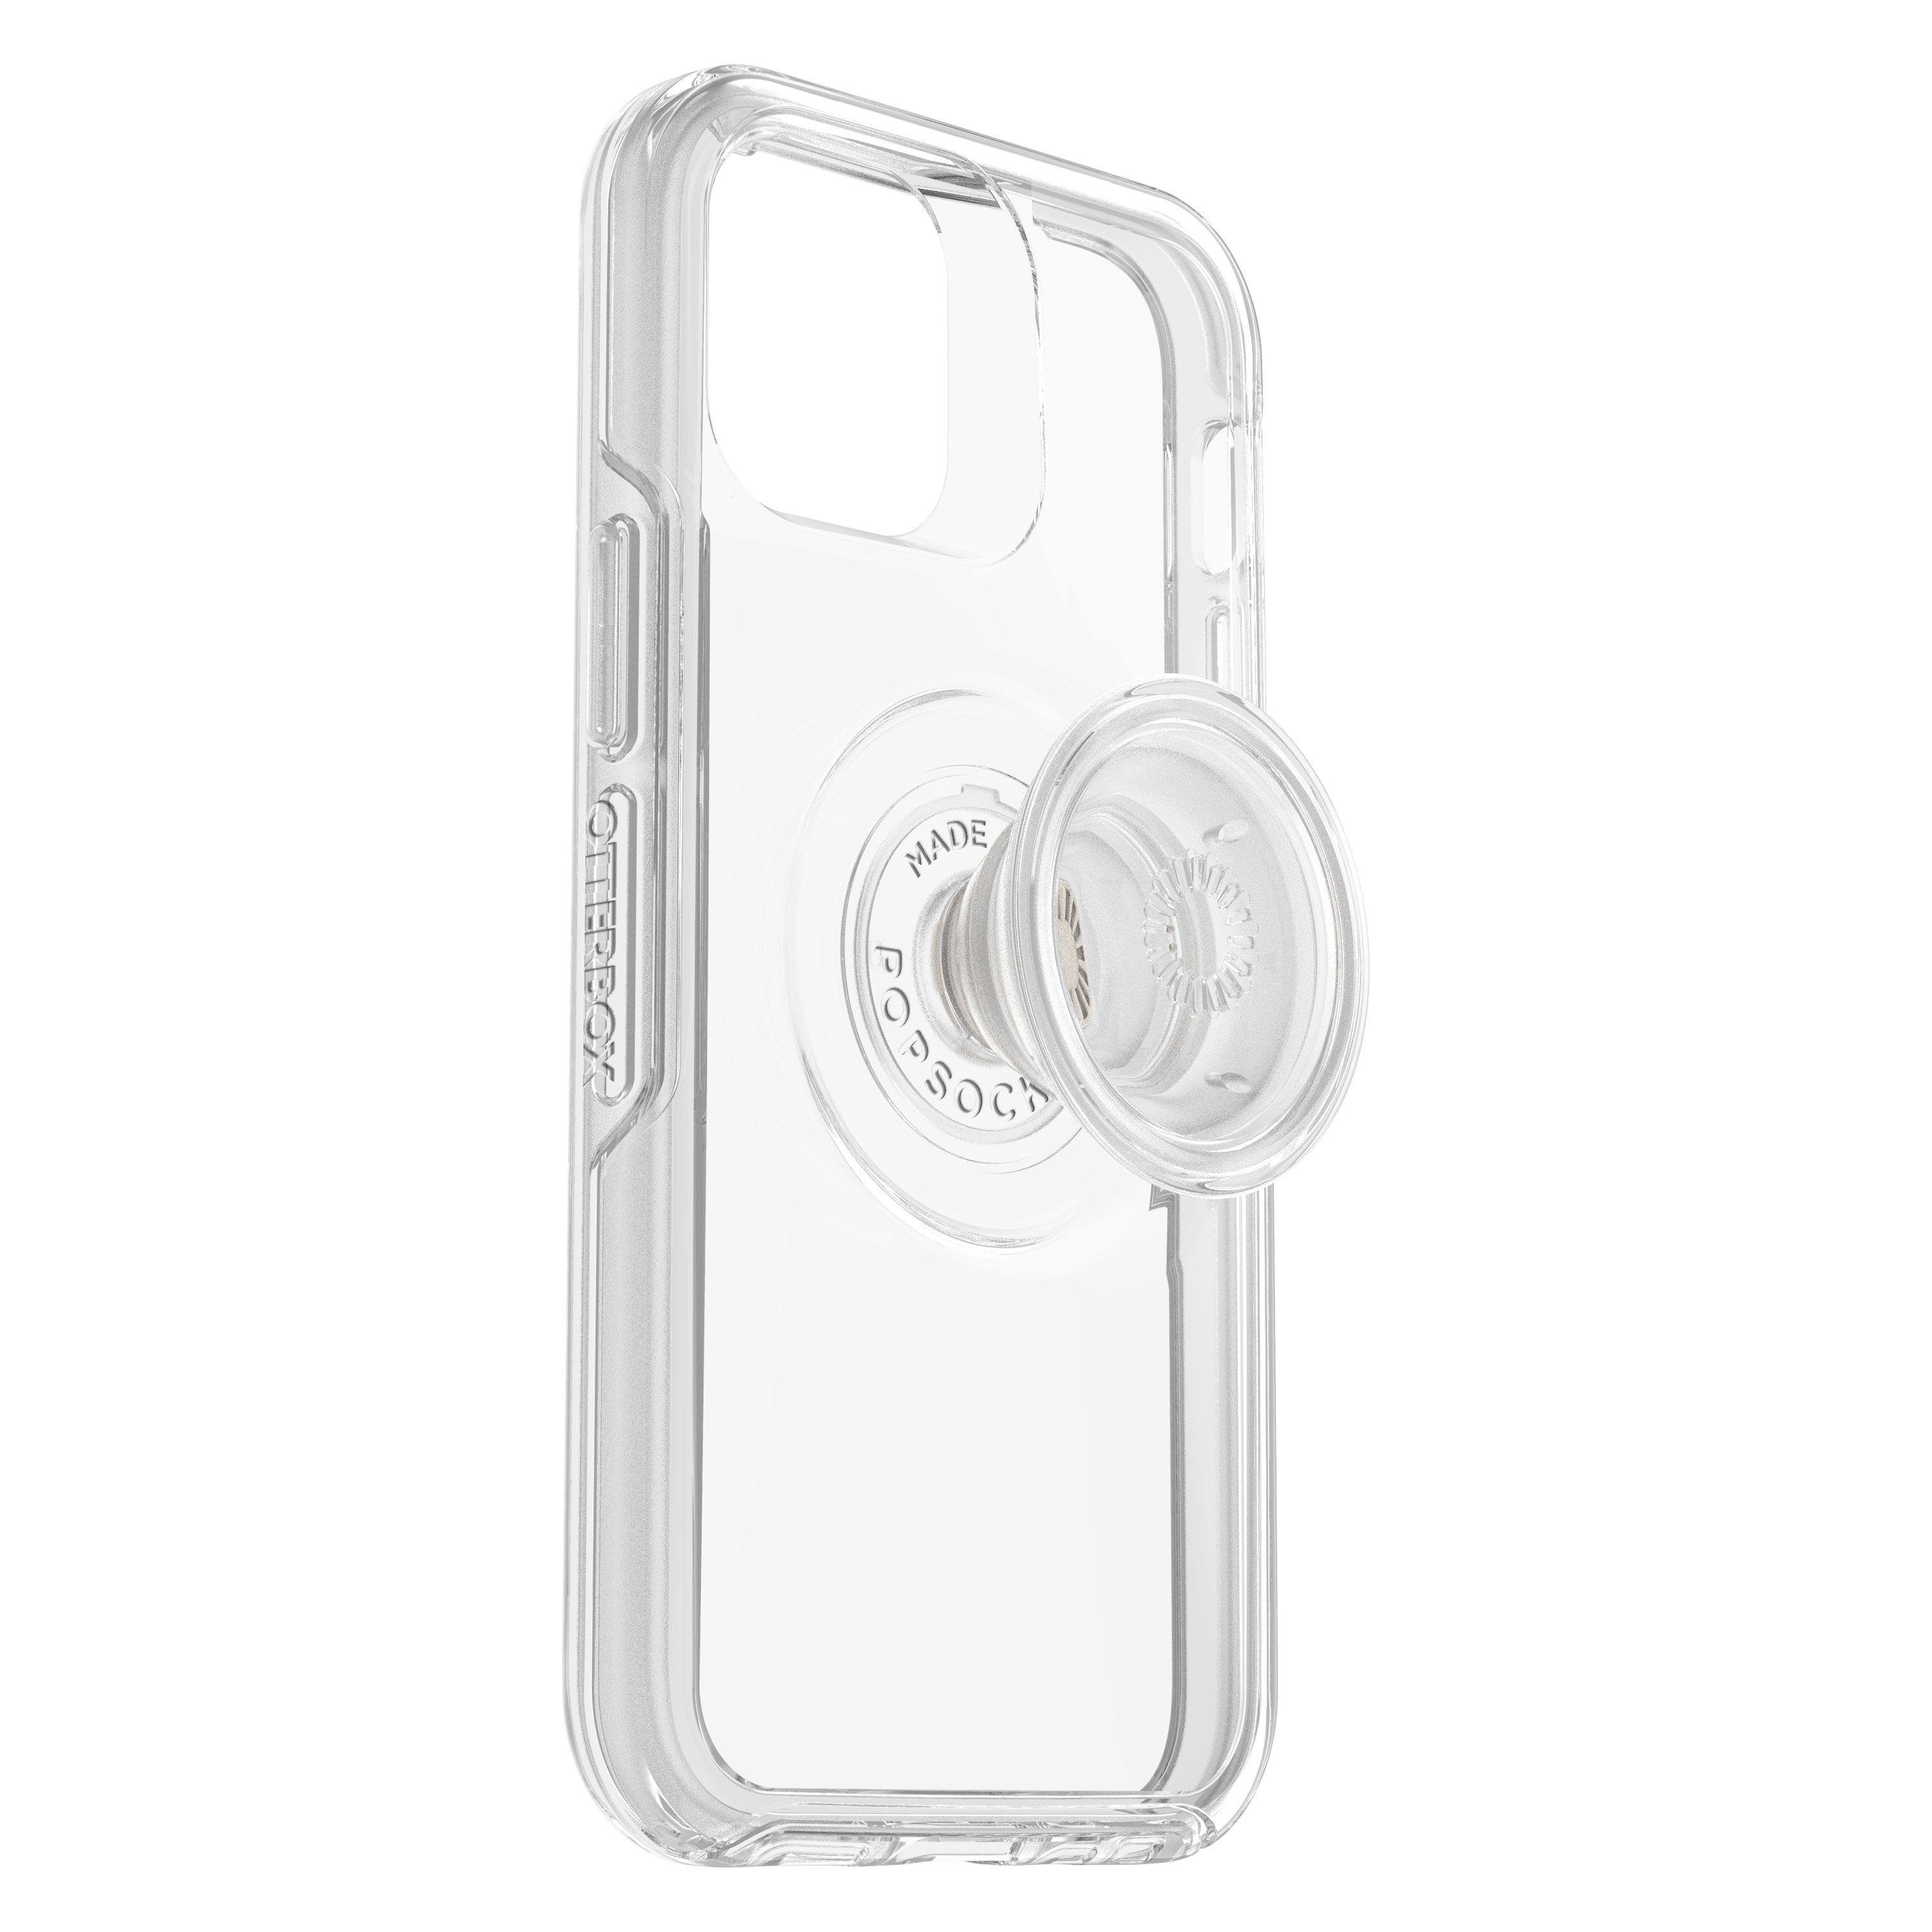 OtterBox OTTER+POP SYMMETRY Apple iPhone 12 Mini case - Drop Protection Cover w/ PopSocket Phone Holder, Slim Protective Selfie Case, Wireless Charging Compatible - Clear